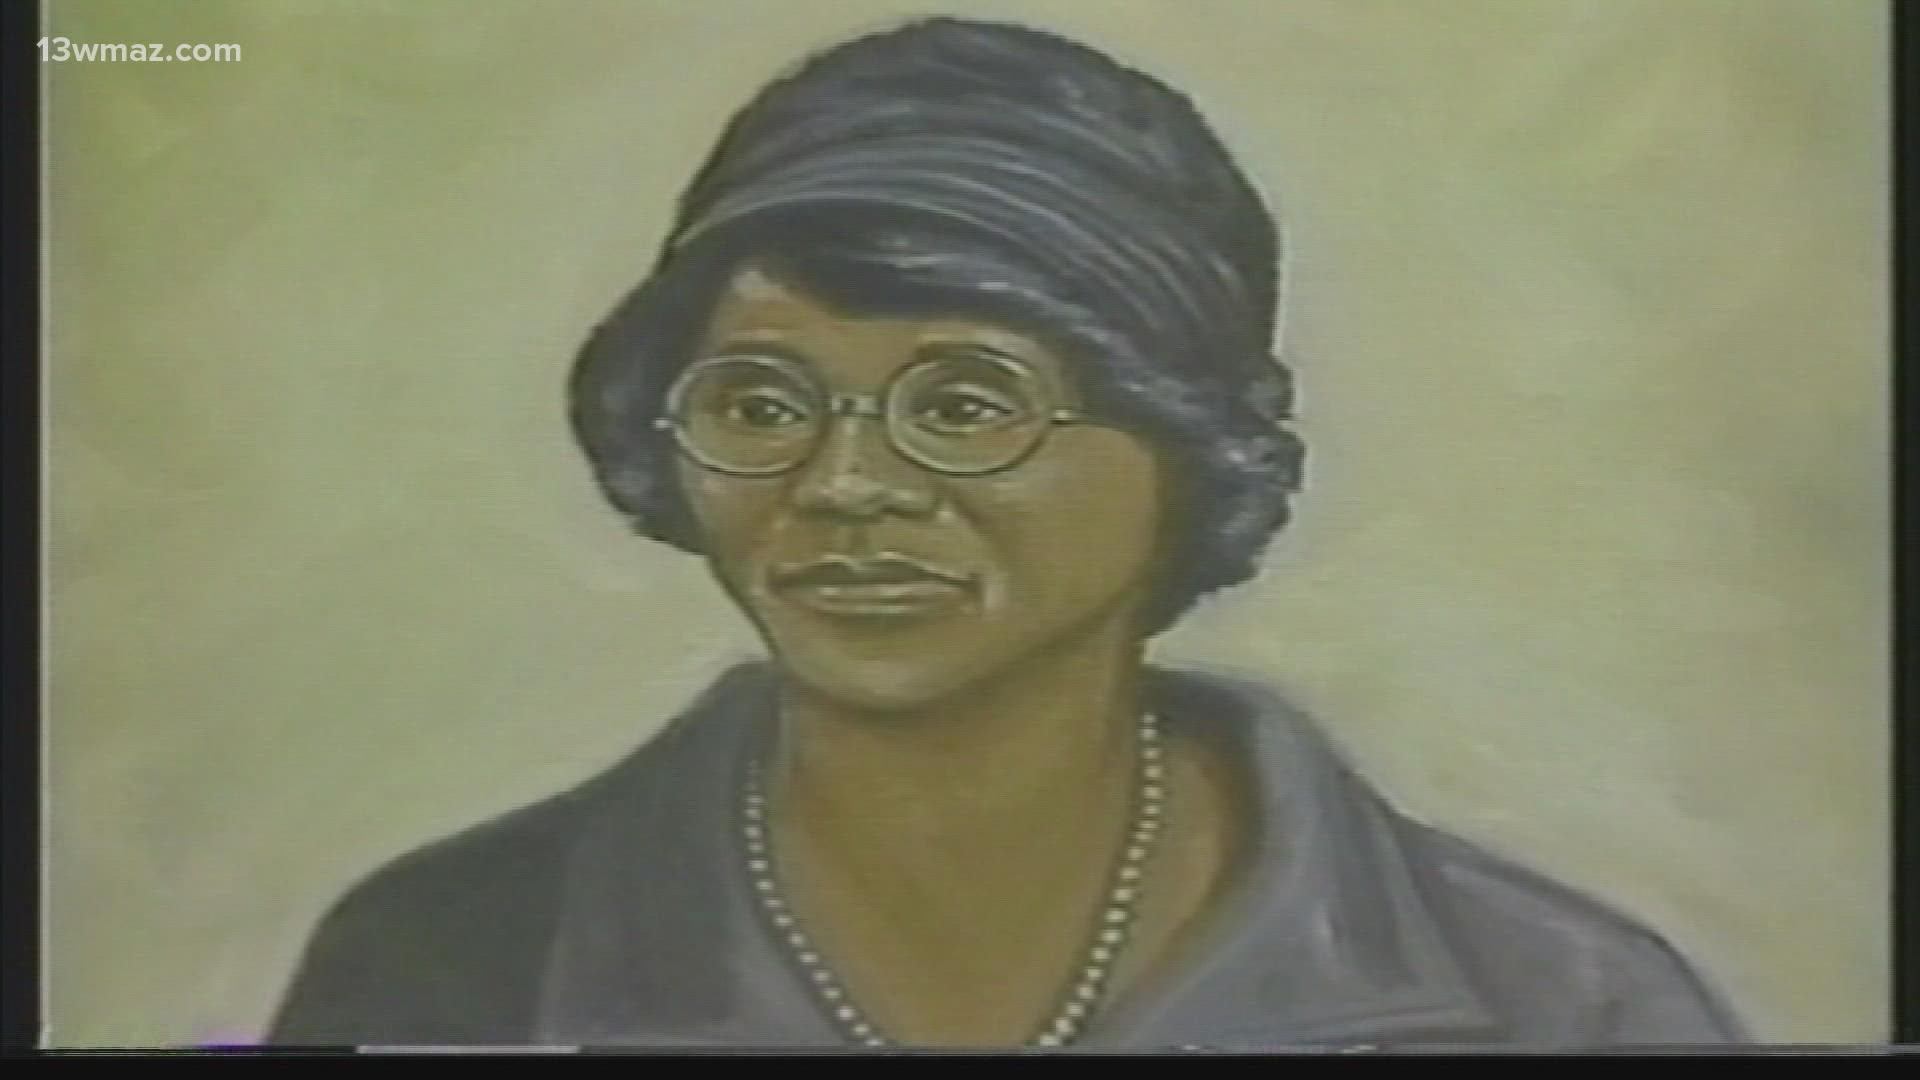 Minnie Lee Smith was a Macon educator who established her own school called Beda-Etta College.